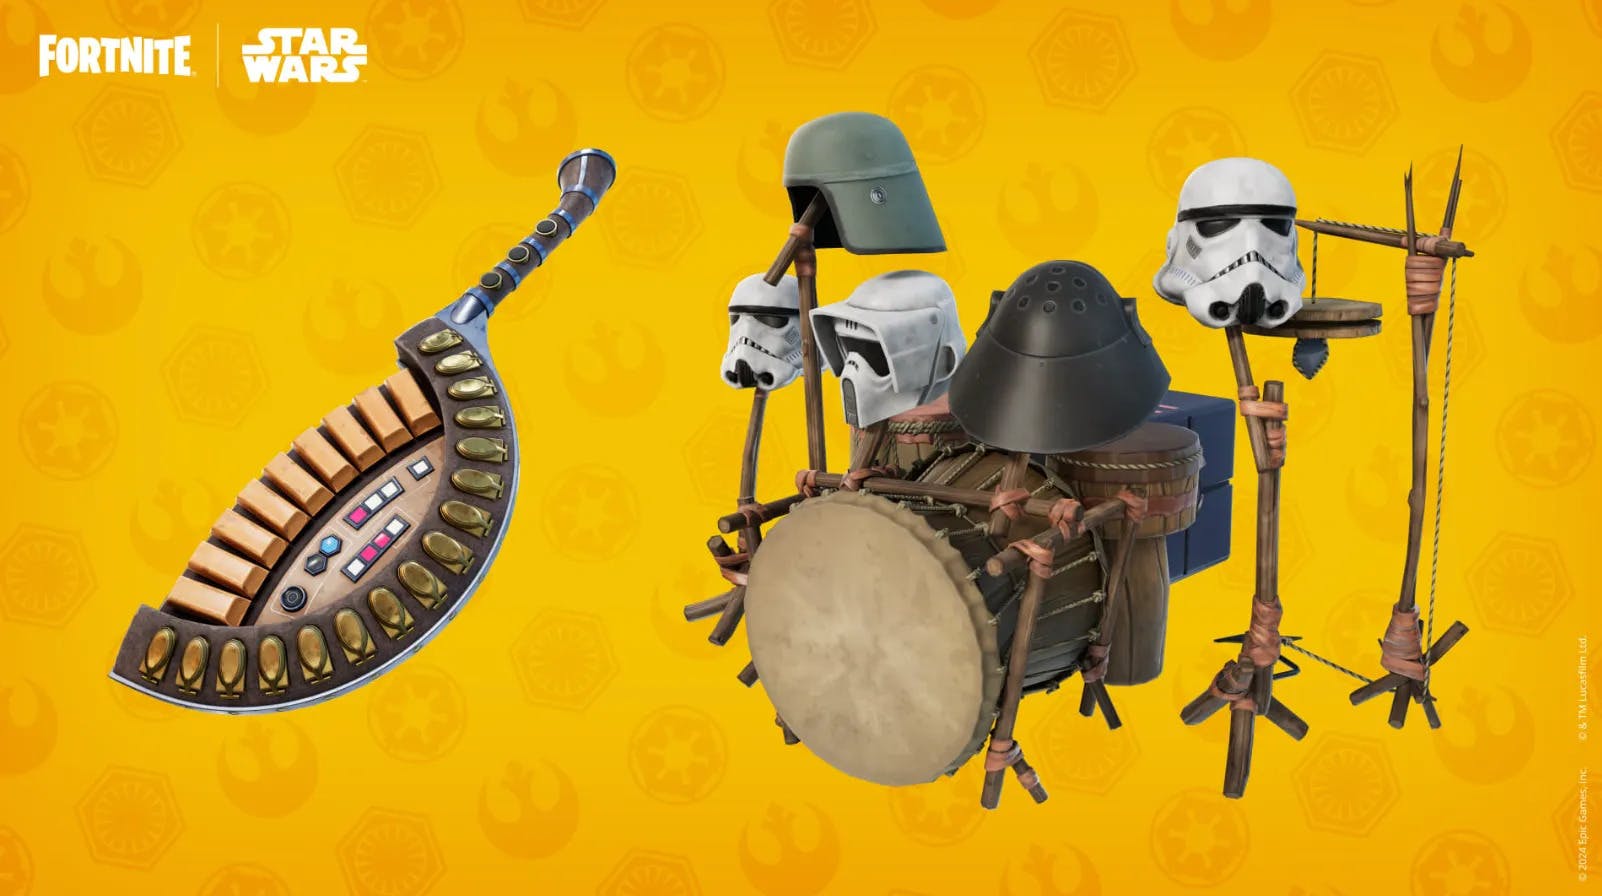 In Fortnite Festival, players can unlock the free Seven String Hallikset Guitar through Star Wars quests. 